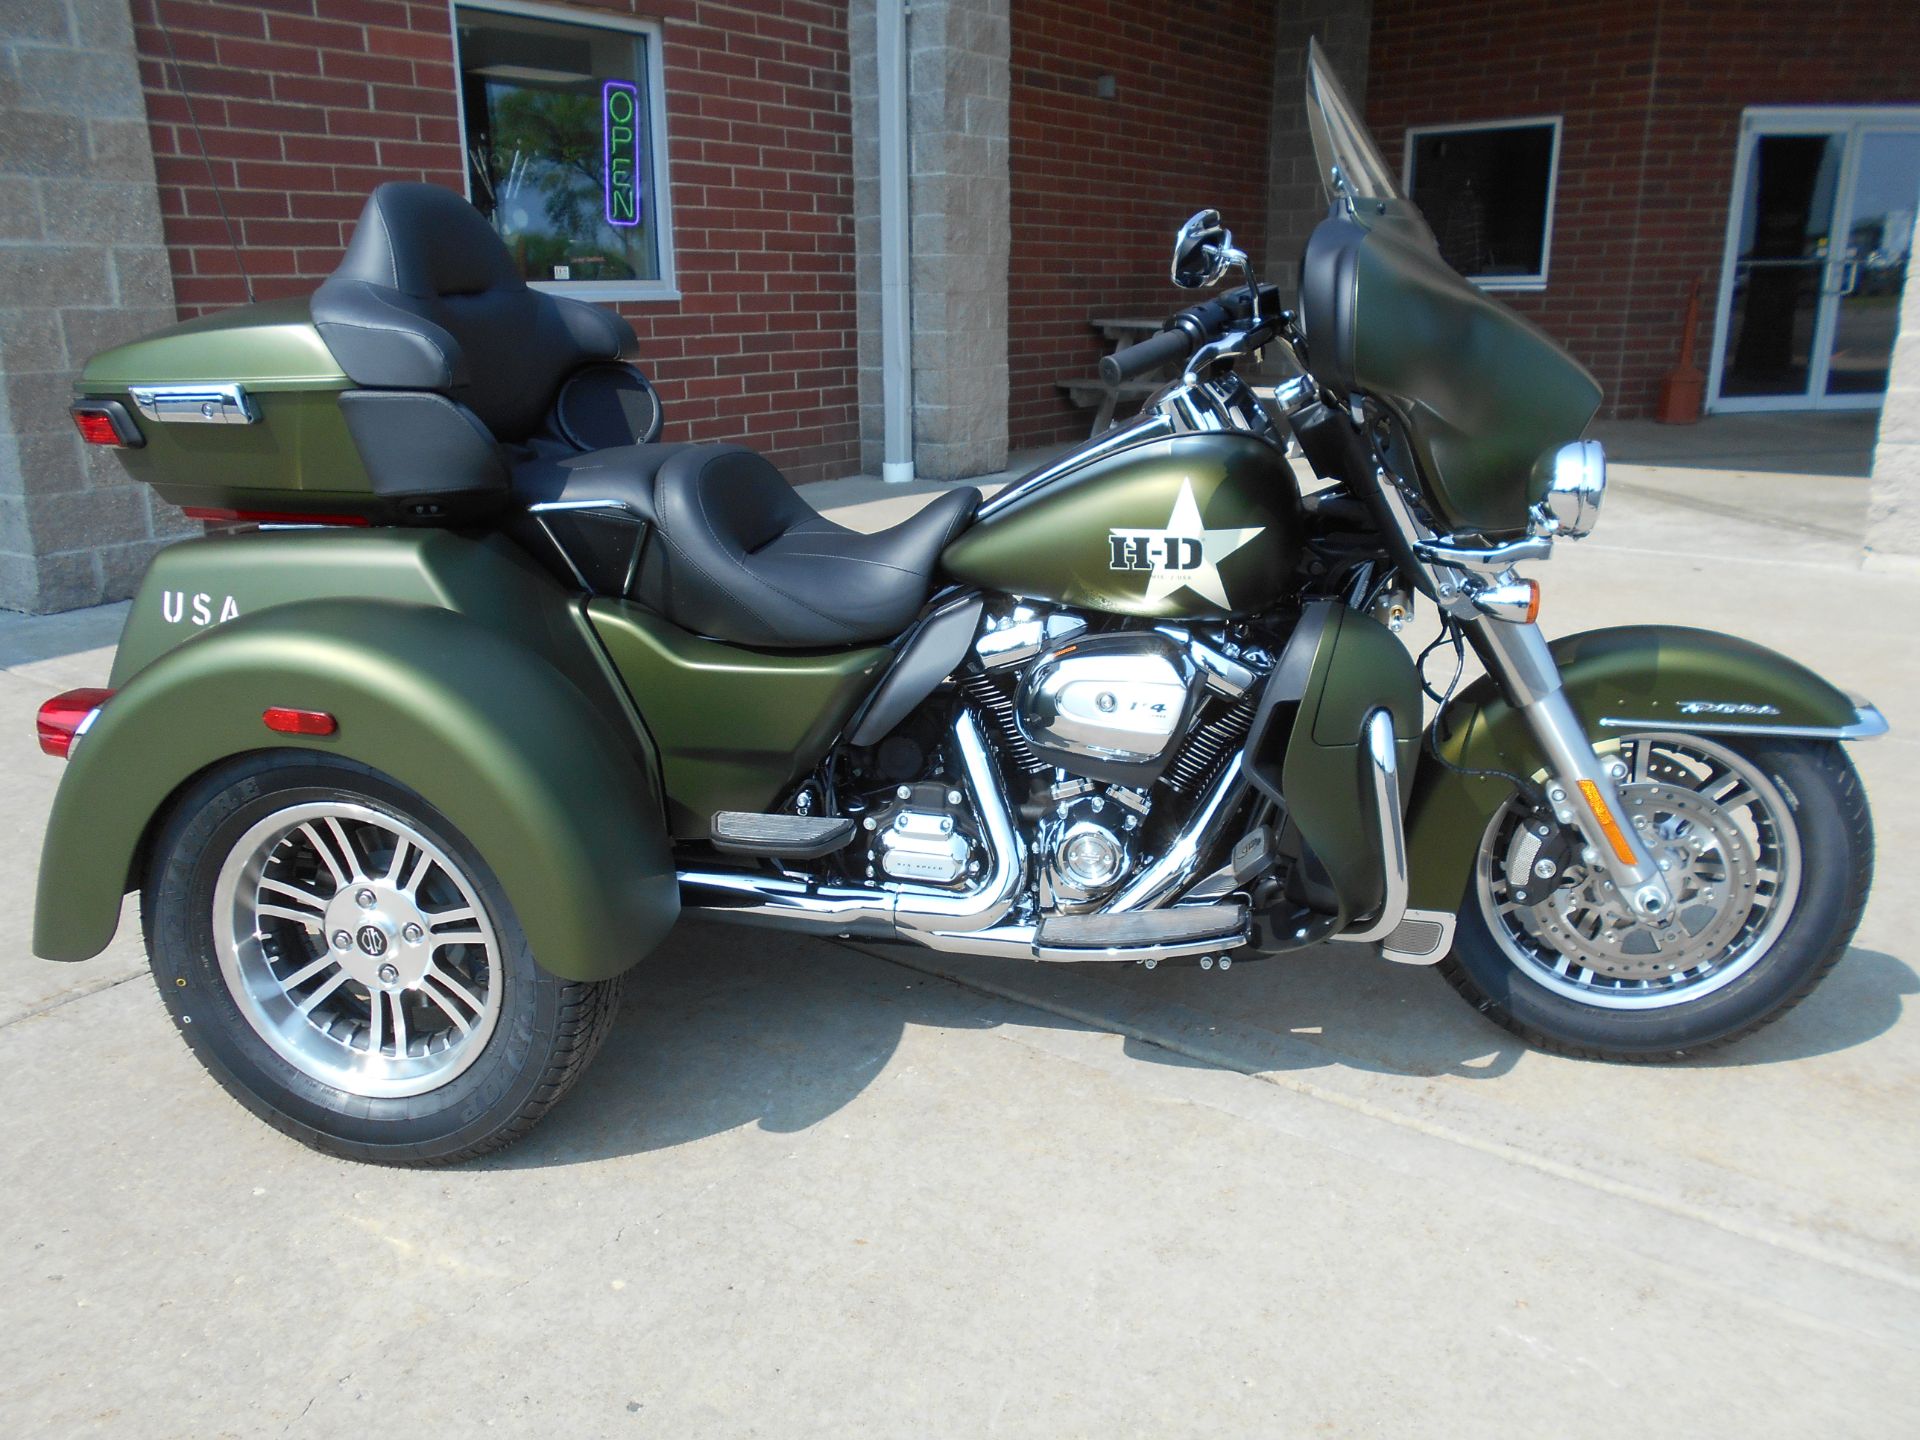 2022 Harley-Davidson Tri Glide Ultra (G.I. Enthusiast Collection) in Mauston, Wisconsin - Photo 1